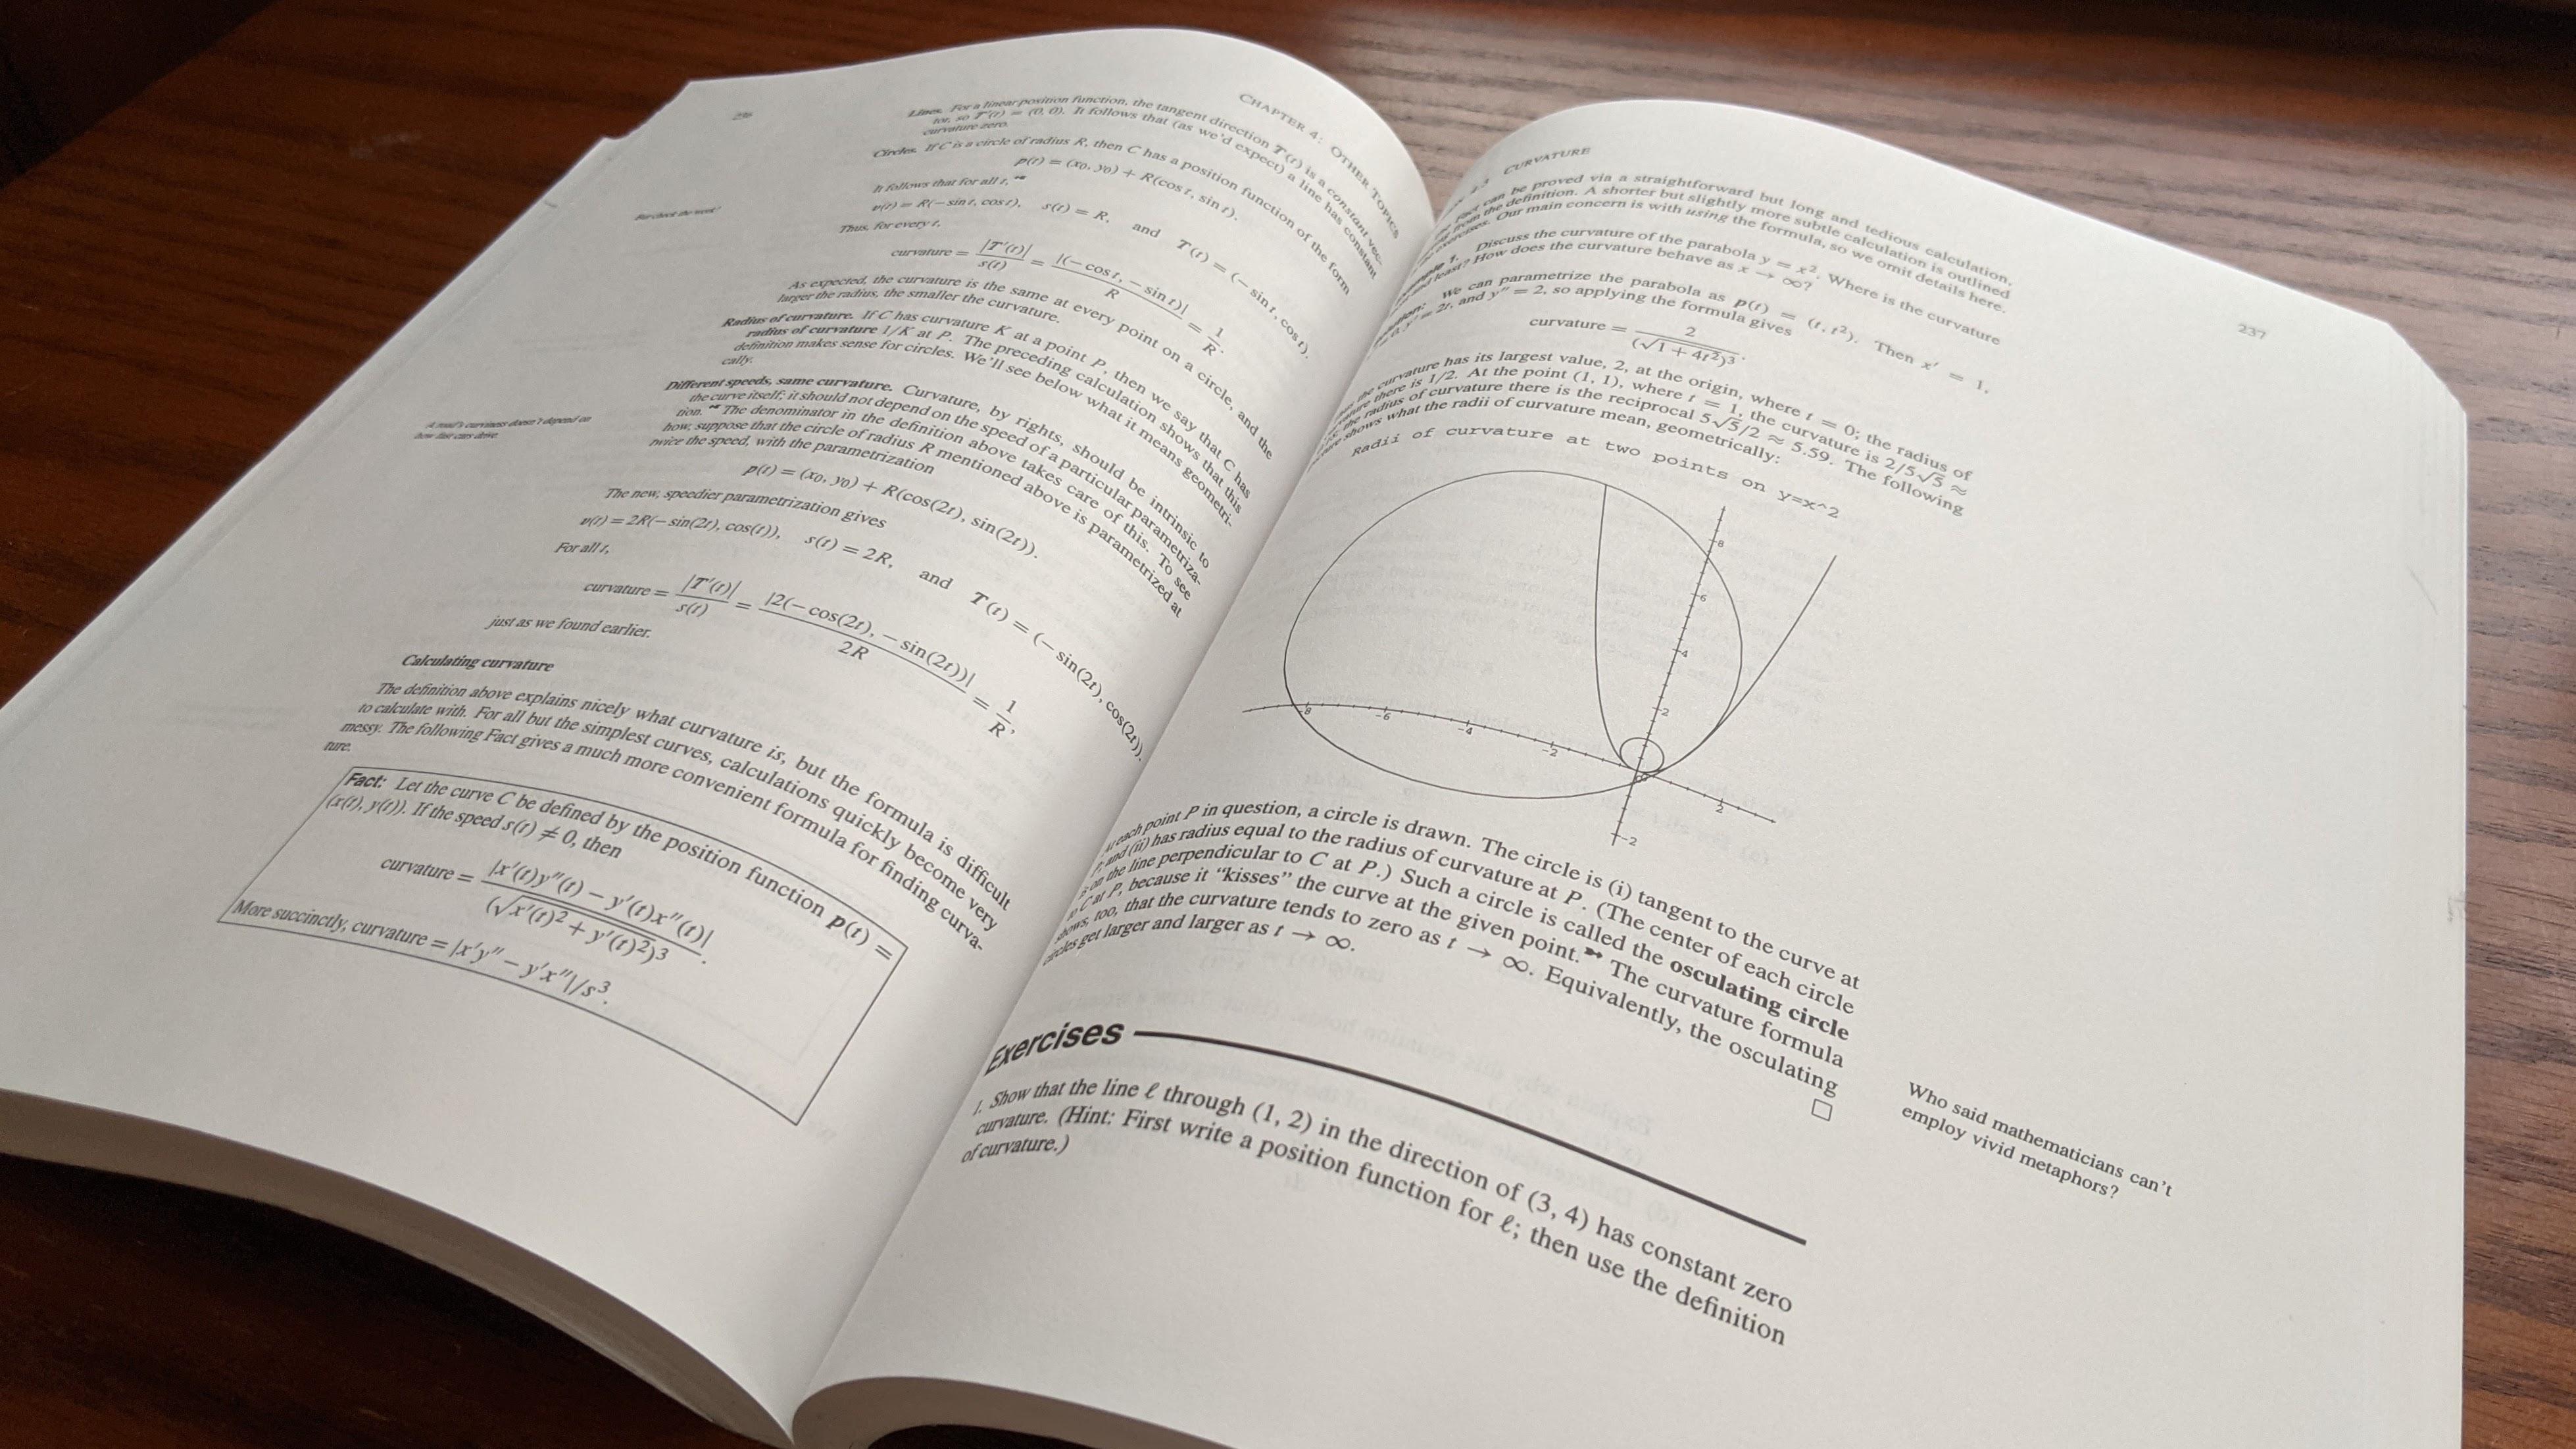 A photograph of a multivariable calculus sitting open on a wooden desktop.